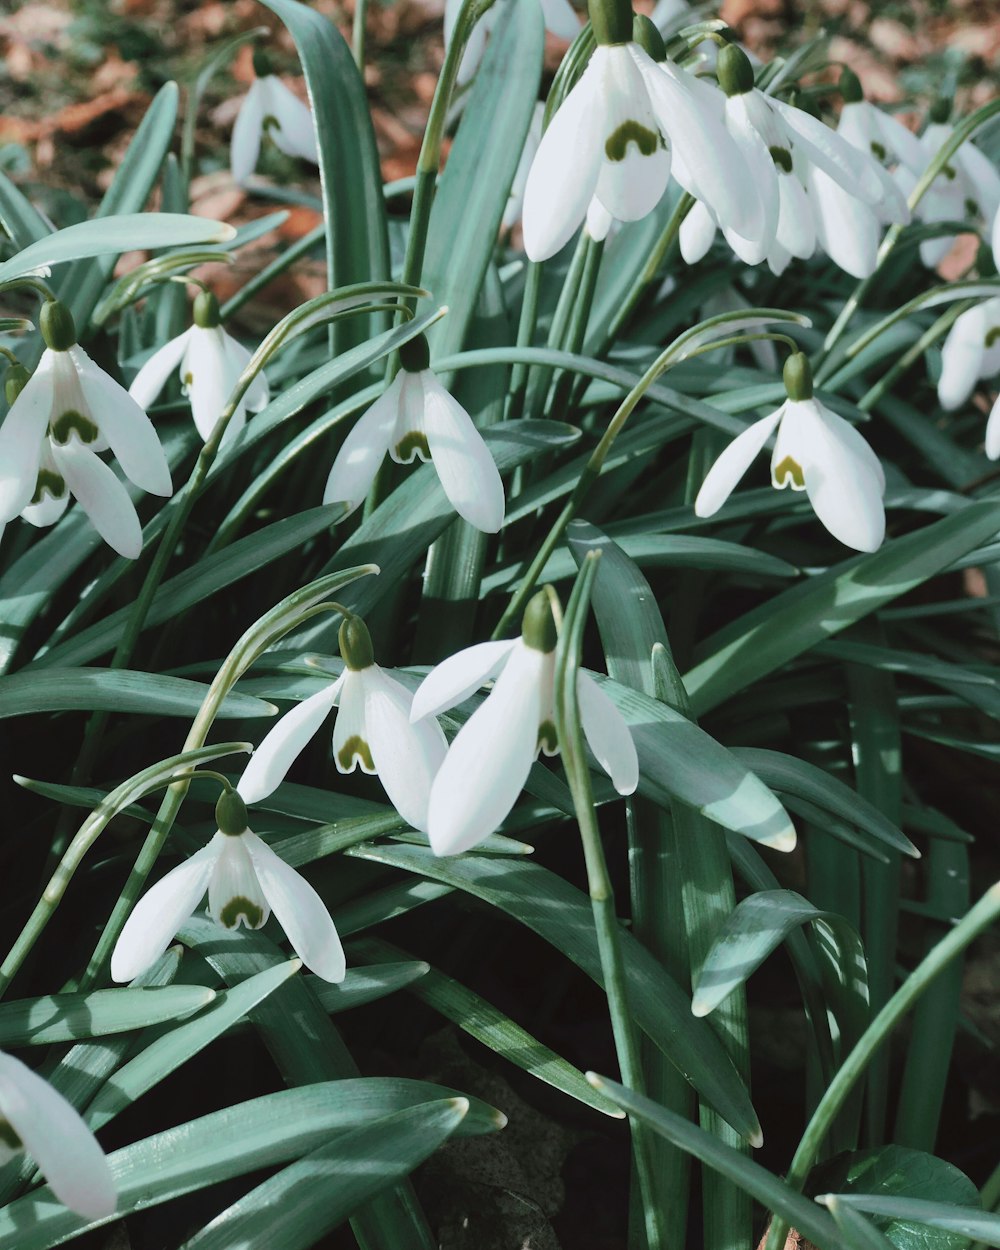 close-up photography of snowdrop flowers